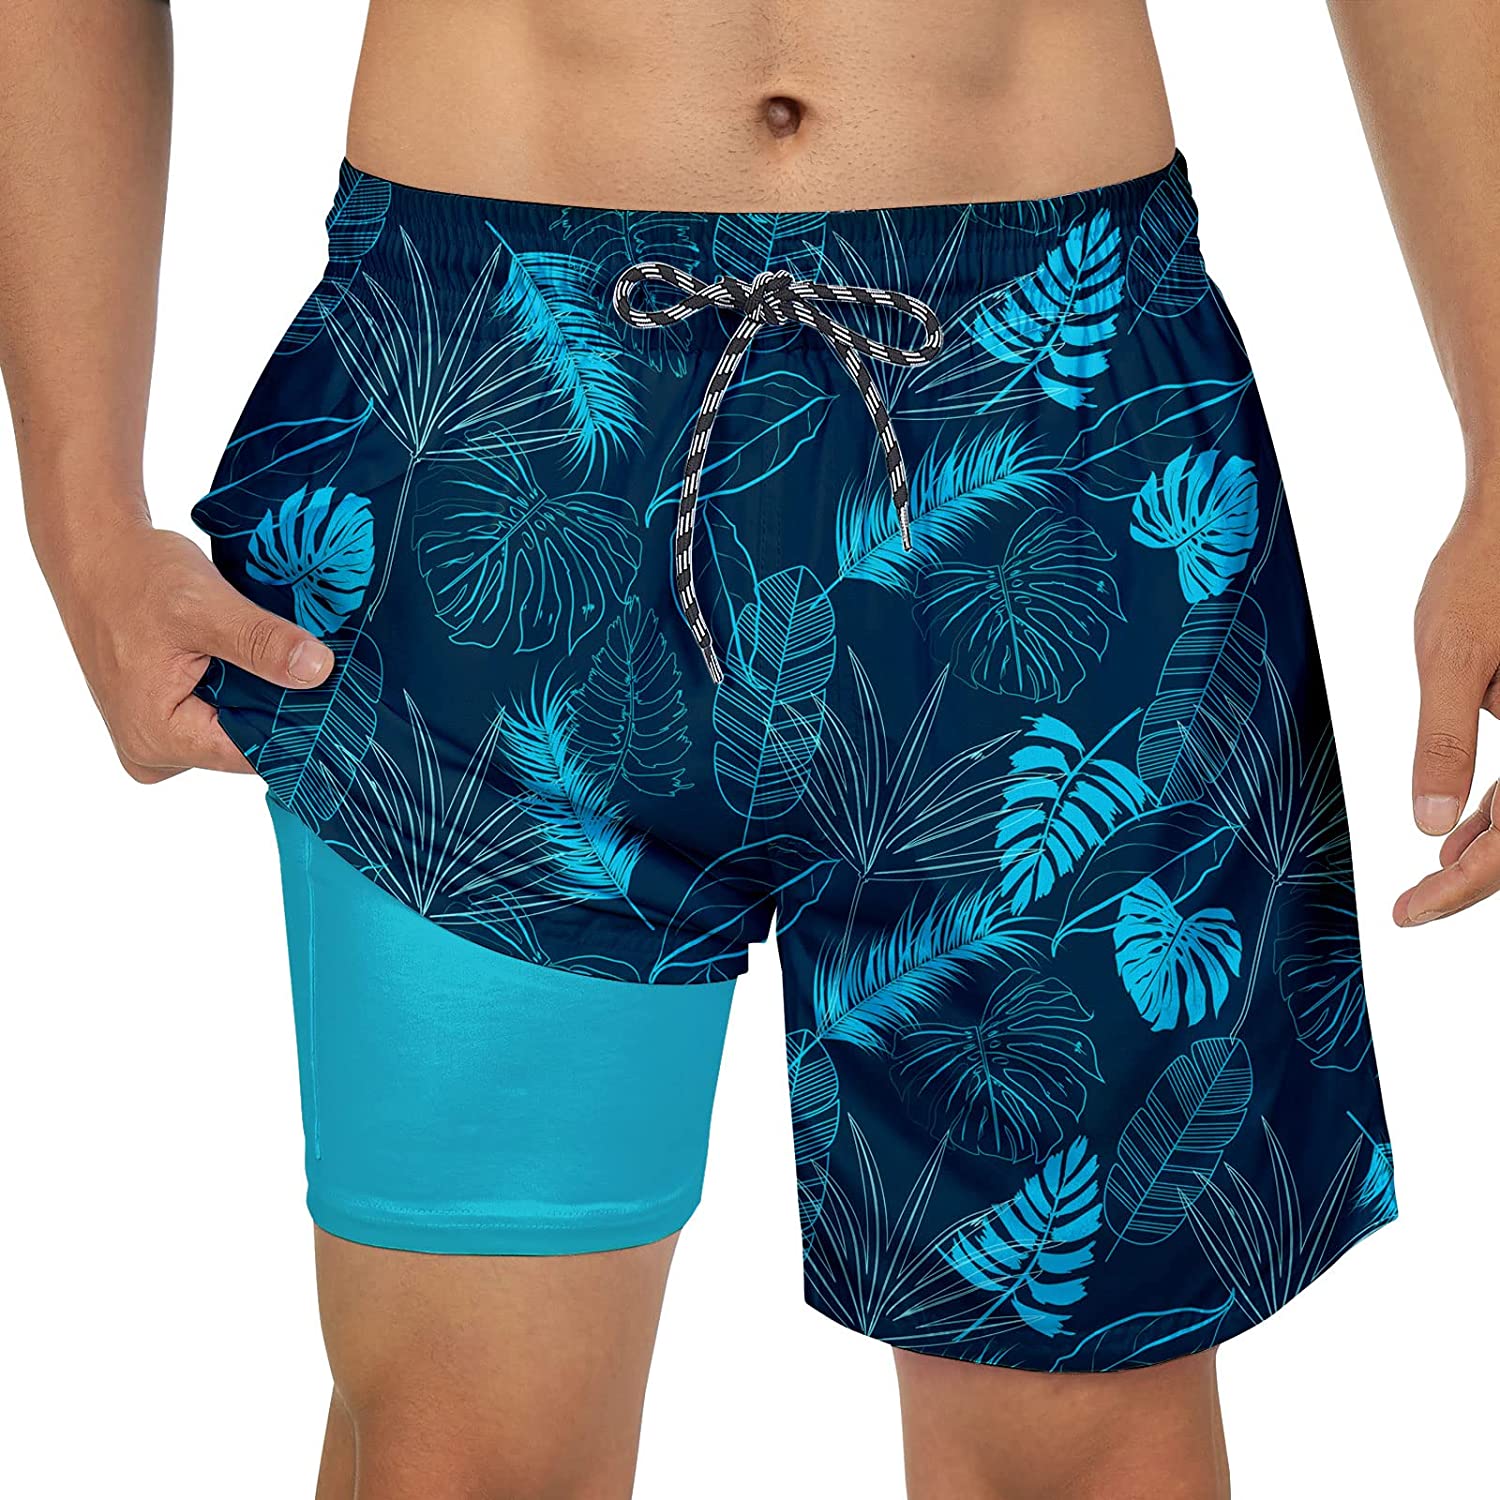 youth swim trunks with compression liner